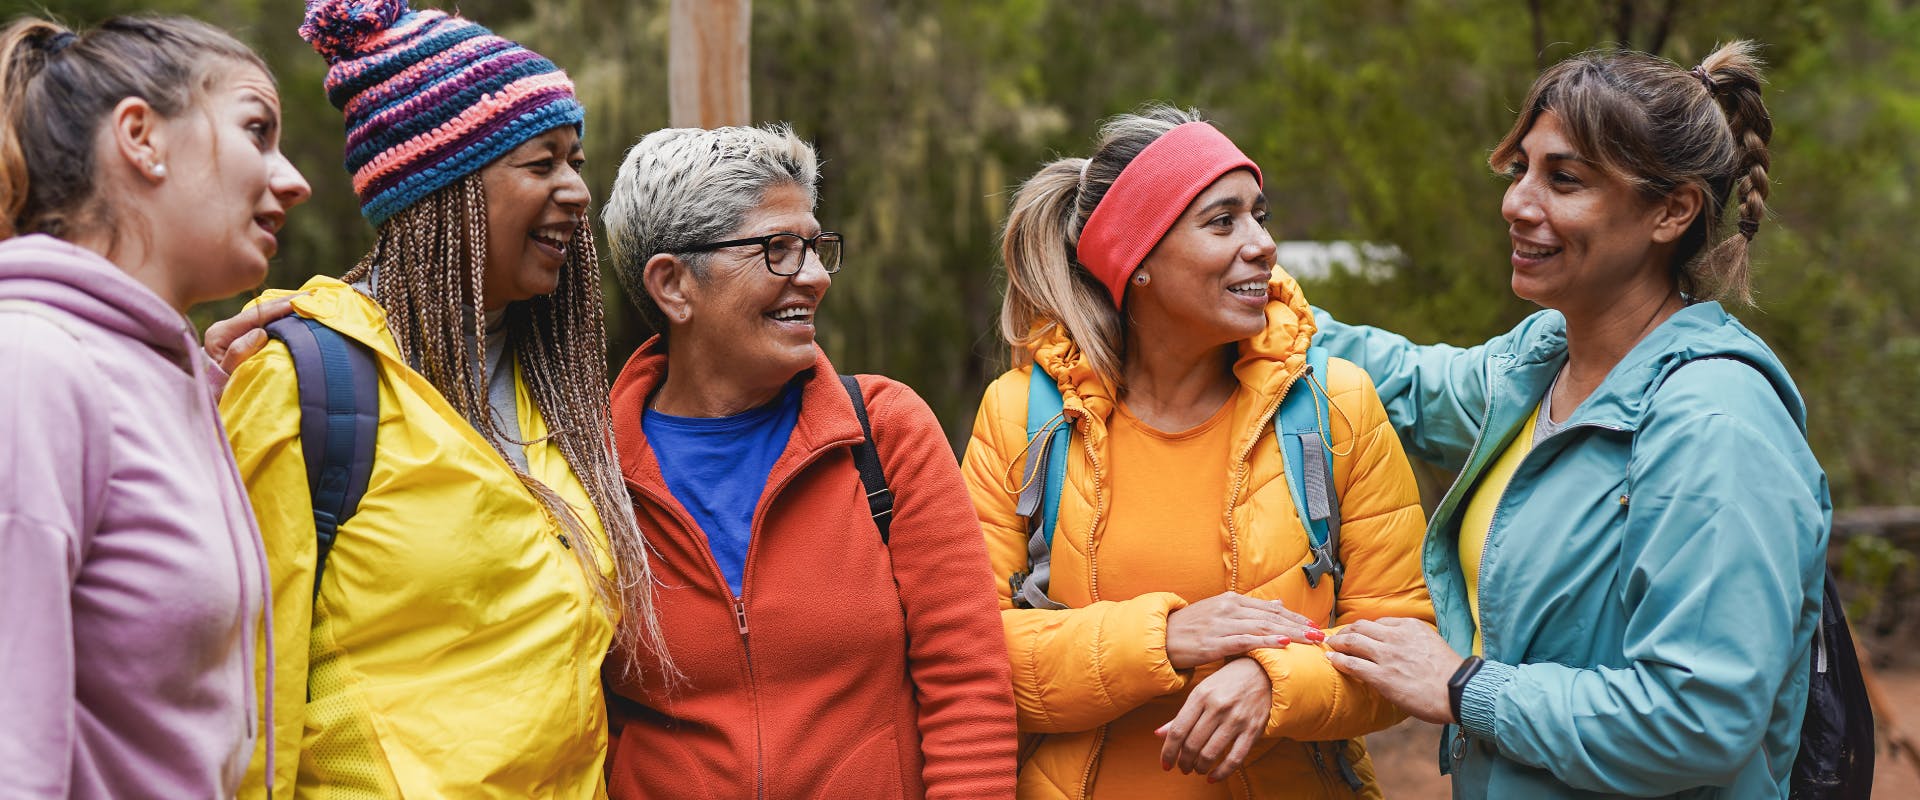 A group of women in a solo female travel group.